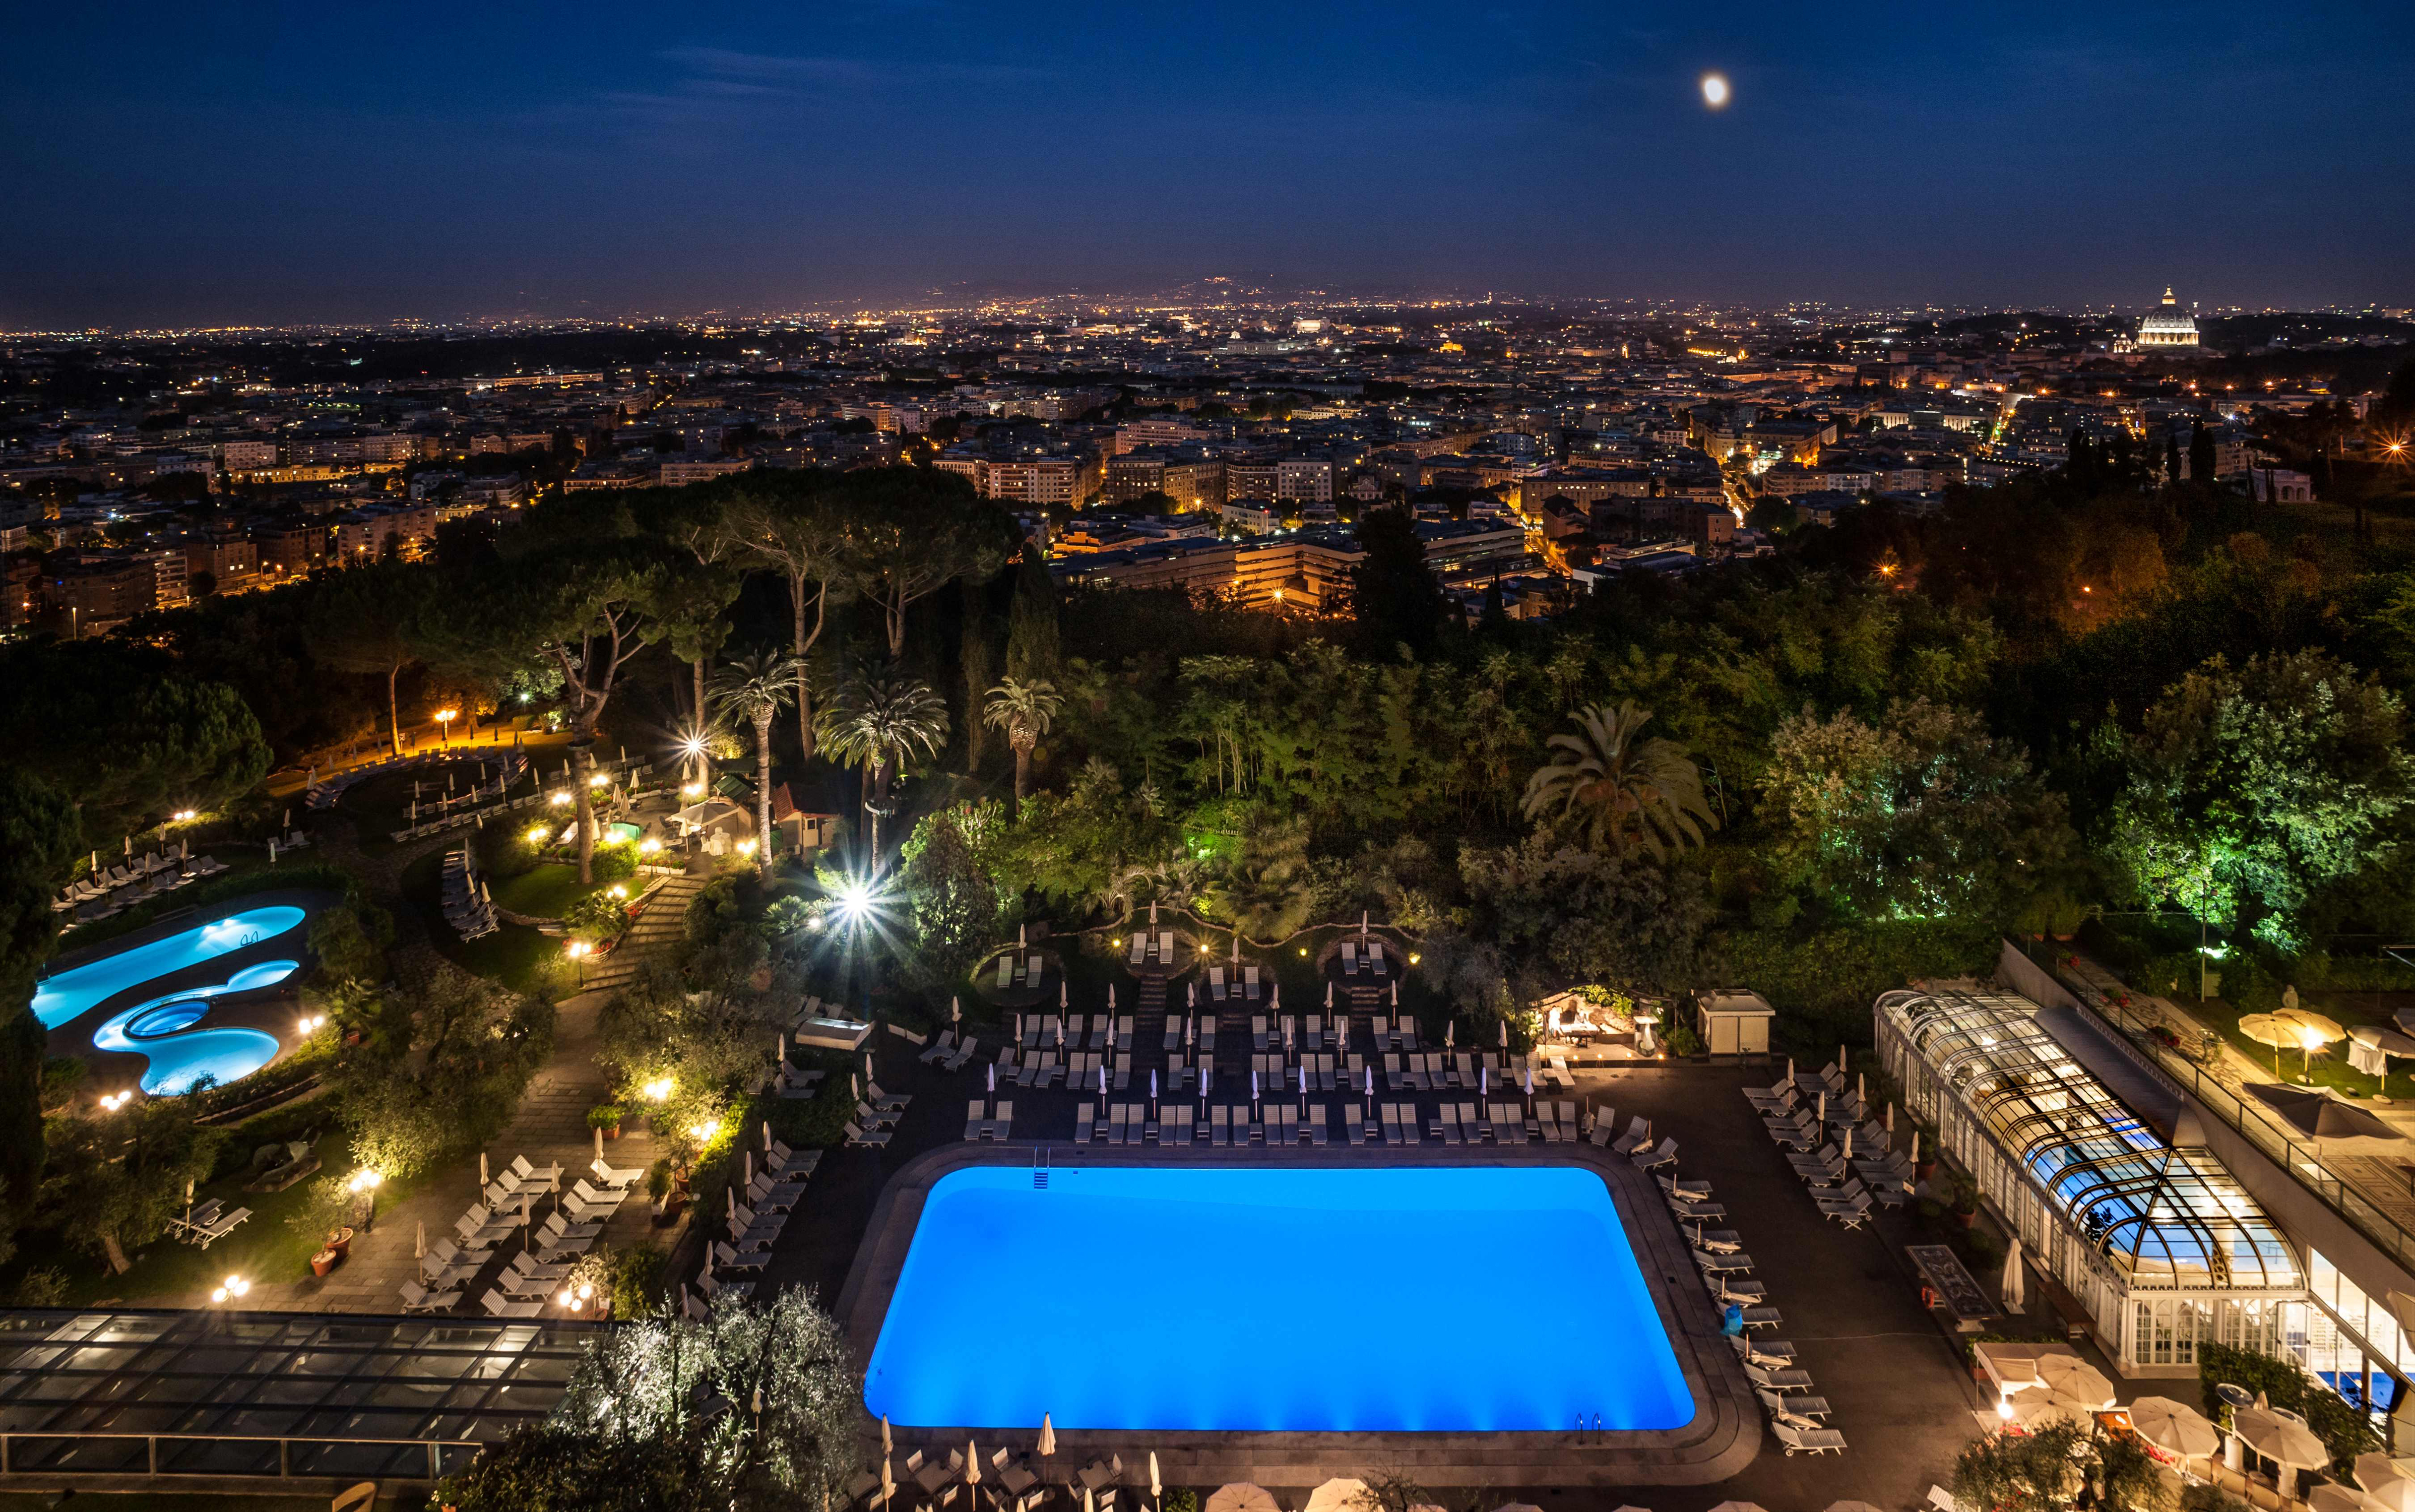 APERTURA Night time view over Rome from hotel terrace